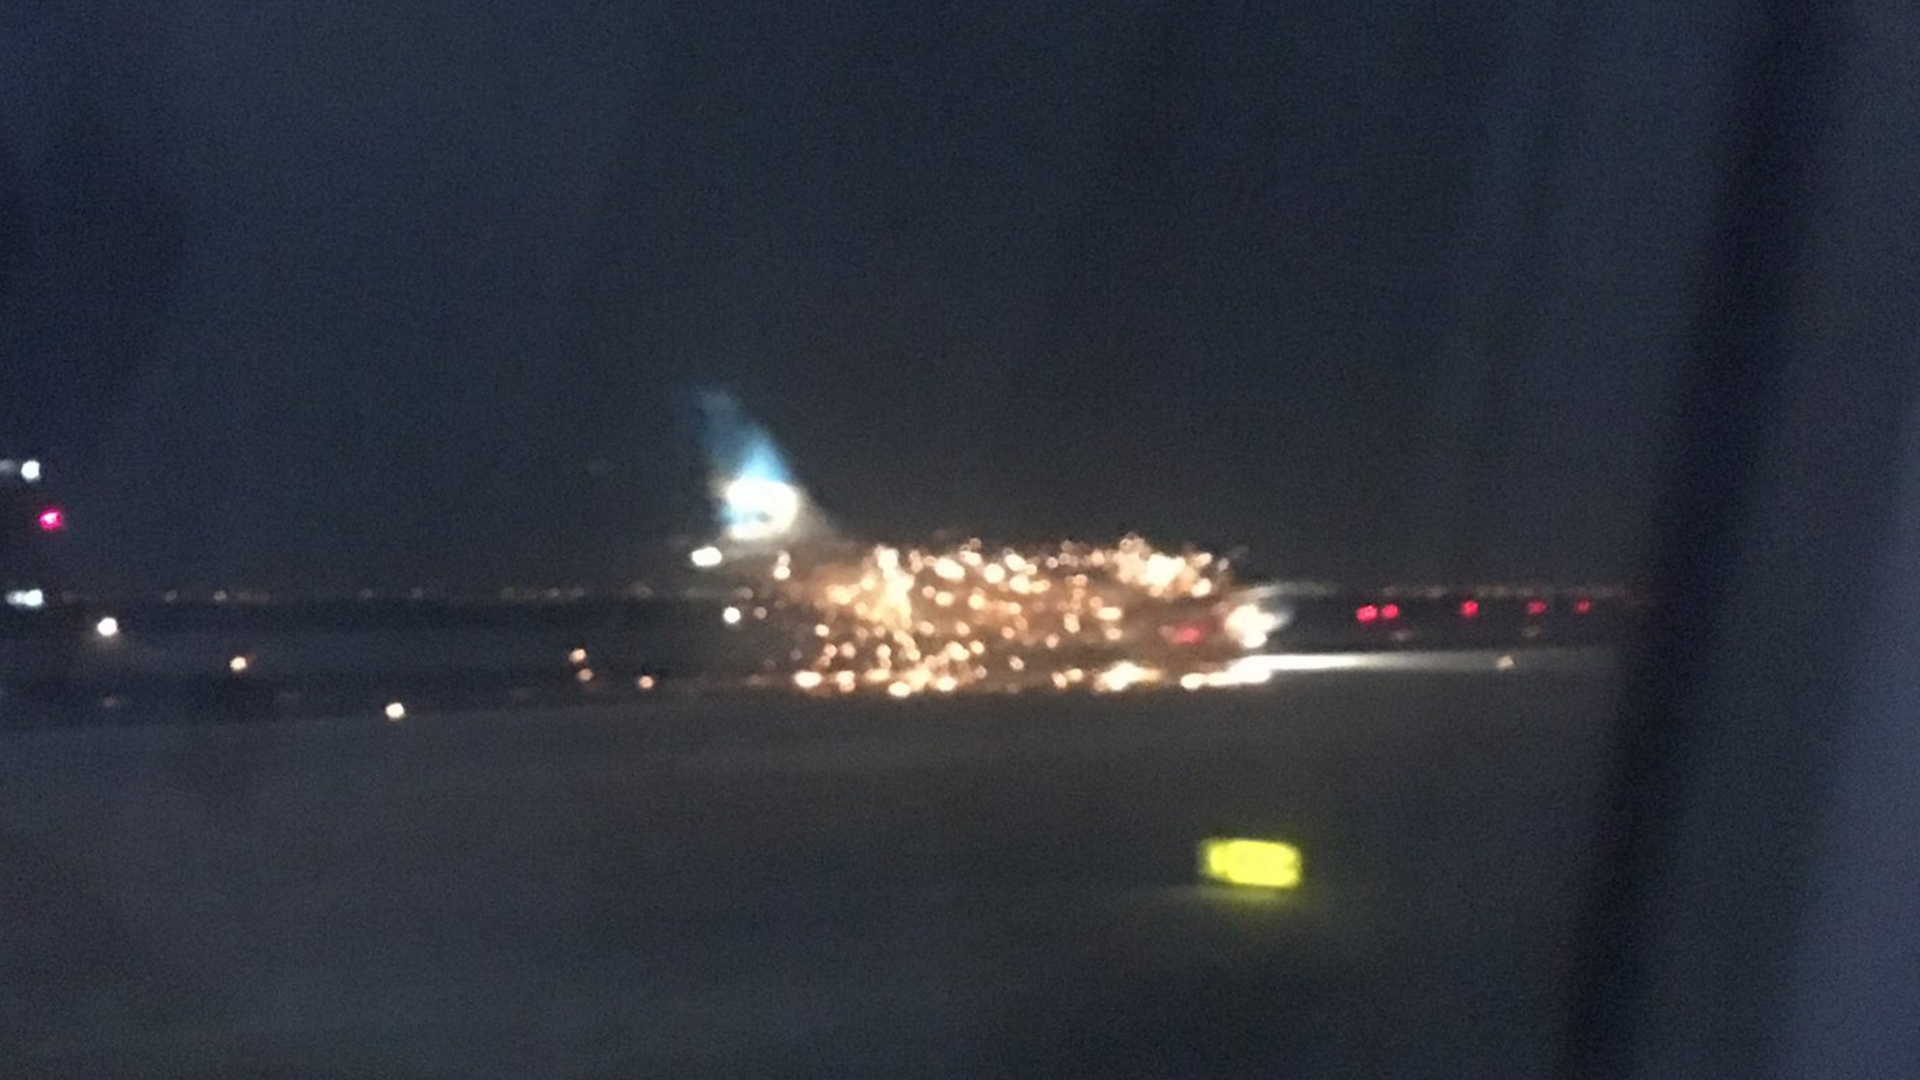 Watch an Airplane’s Engine Explode into Sparks at New York’s JFK Airport